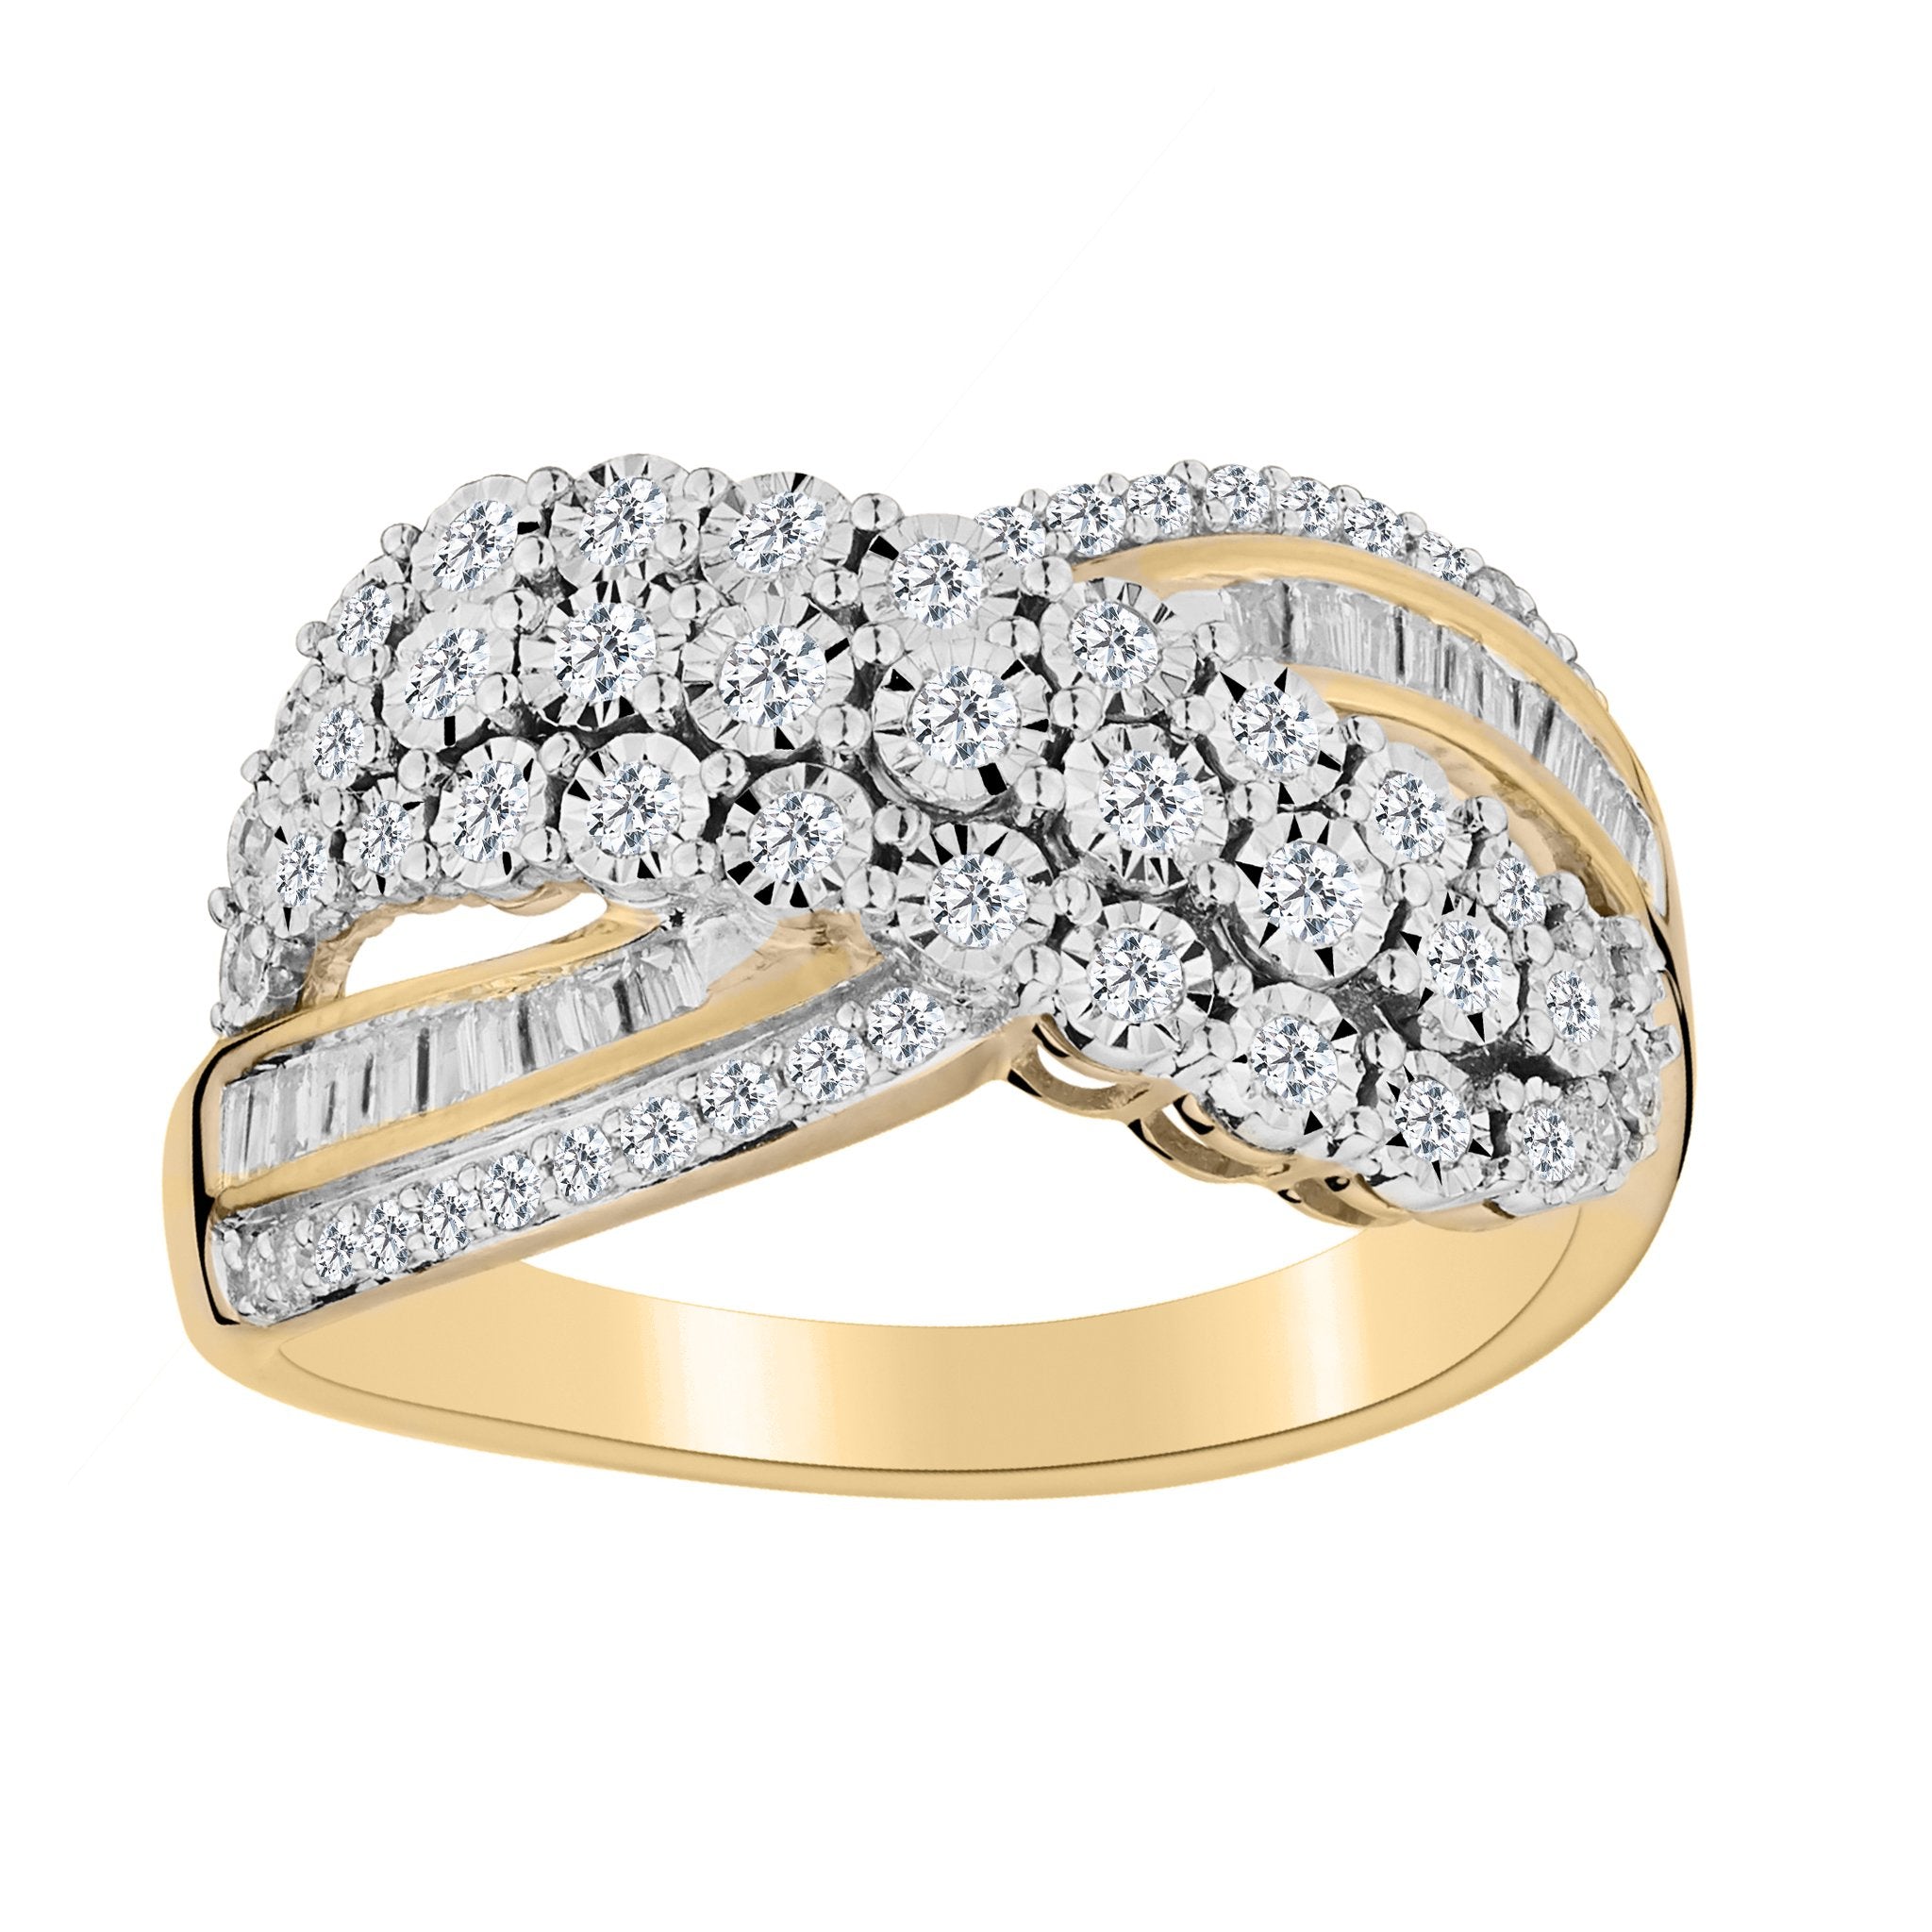 .50 CARAT DIAMOND RING, 10kt YELLOW GOLD. Fashion Rings - Griffin Jewellery Designs